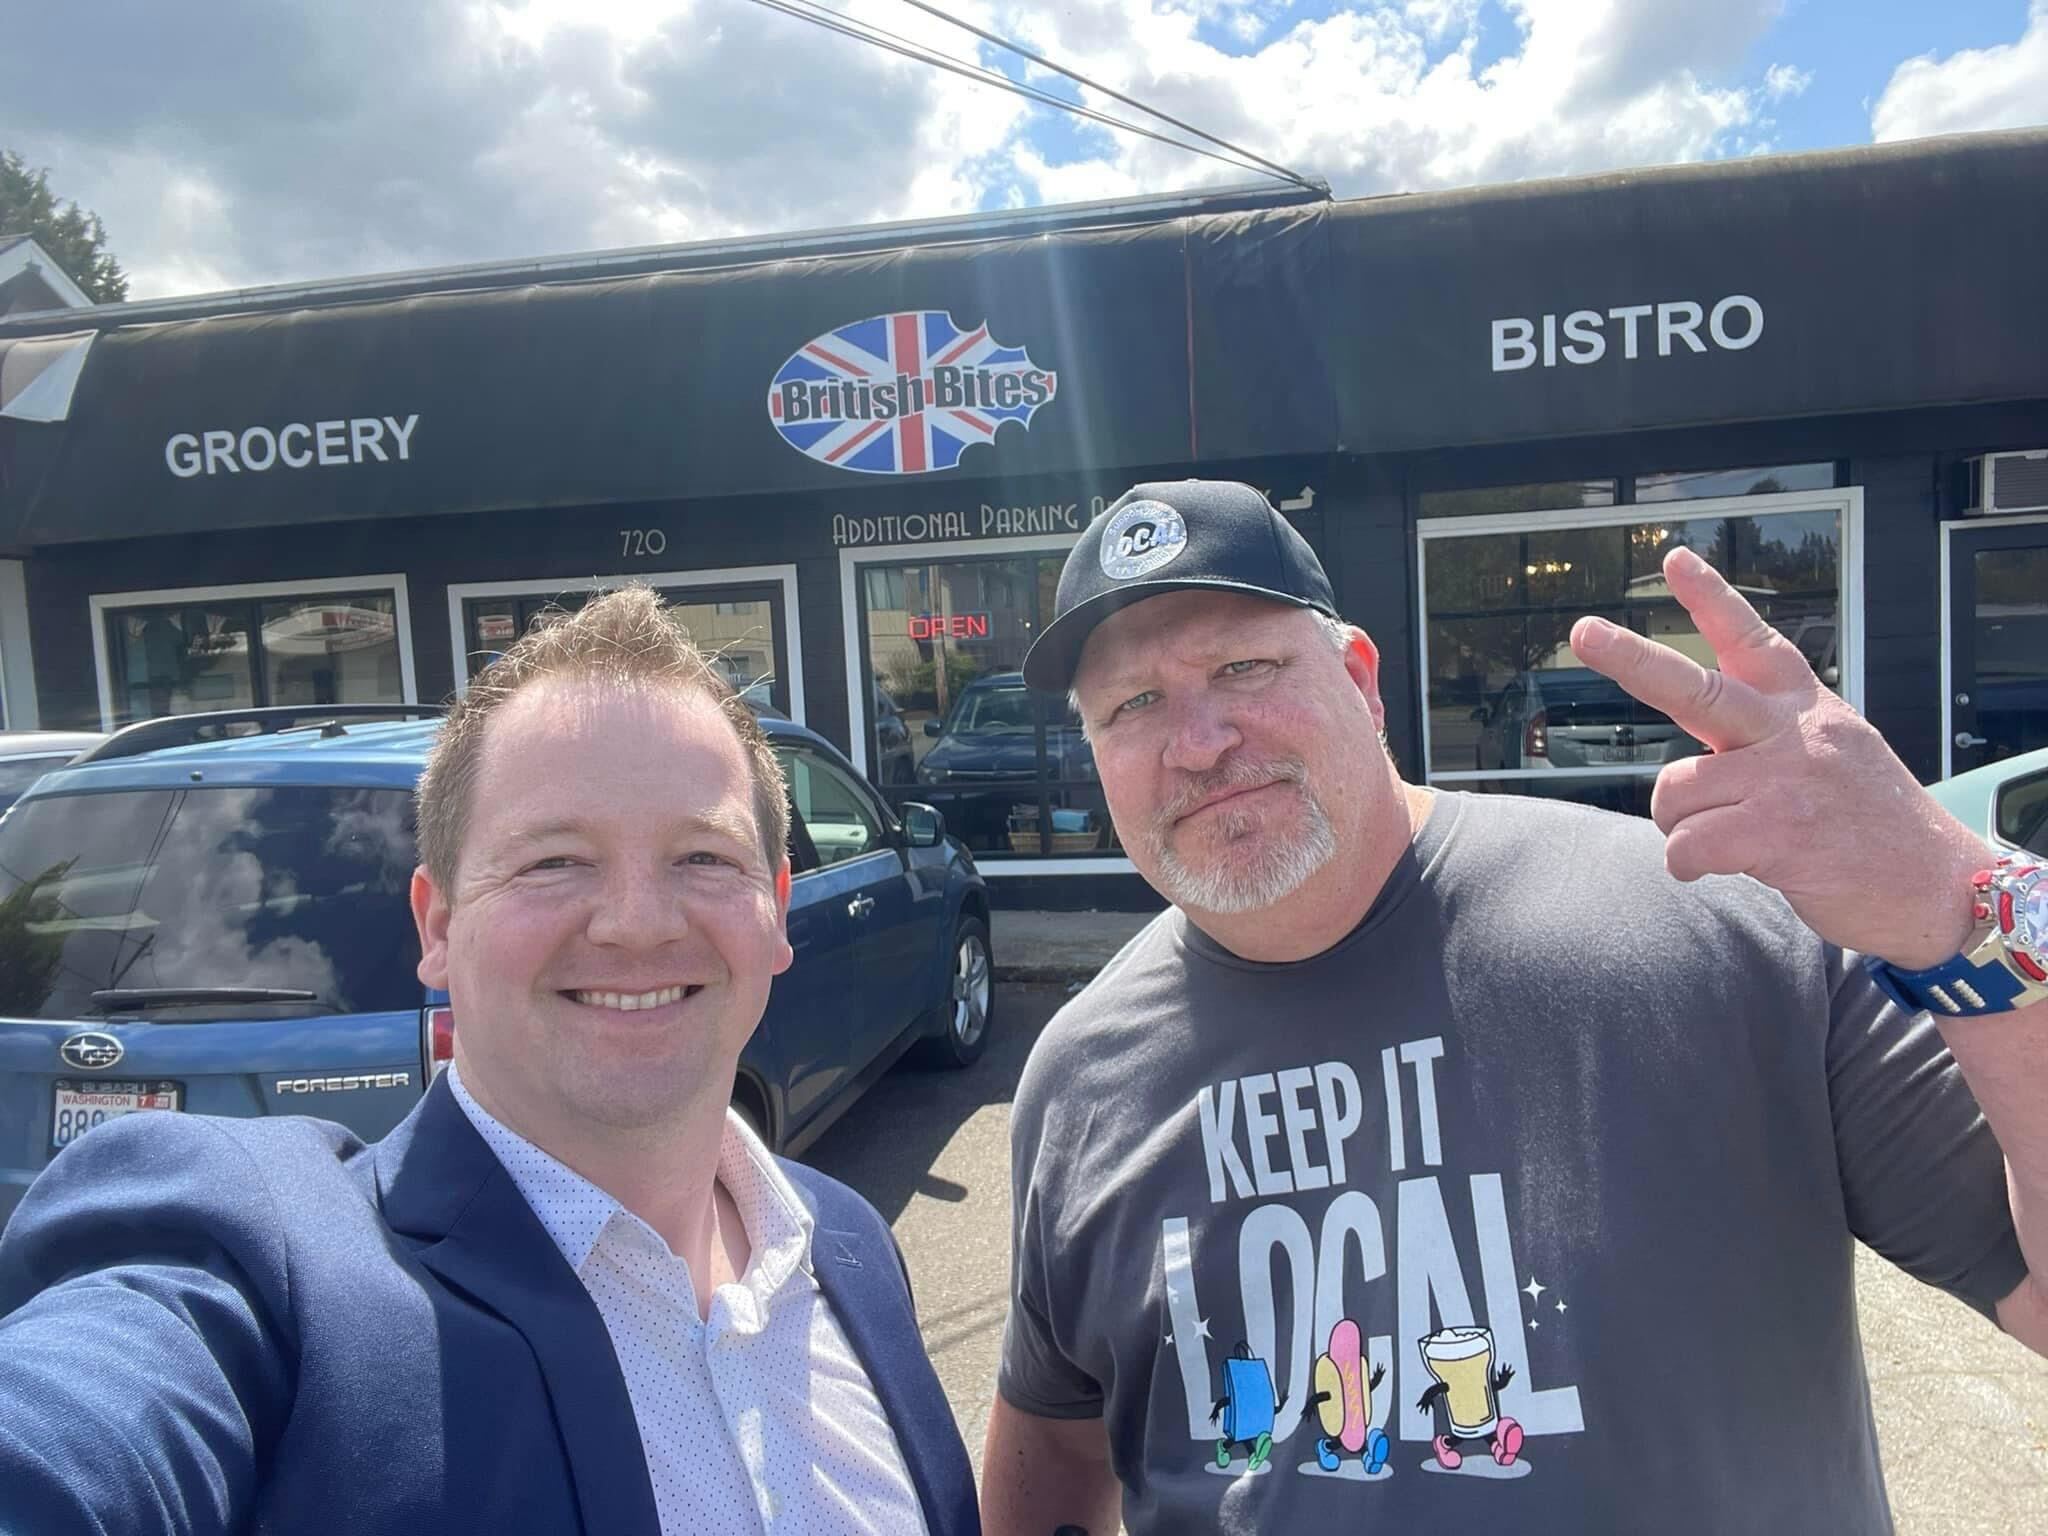 Two men pose in front of a restaurant, British Bites. The man on the right is wearing a hat and pointing two fingers up.